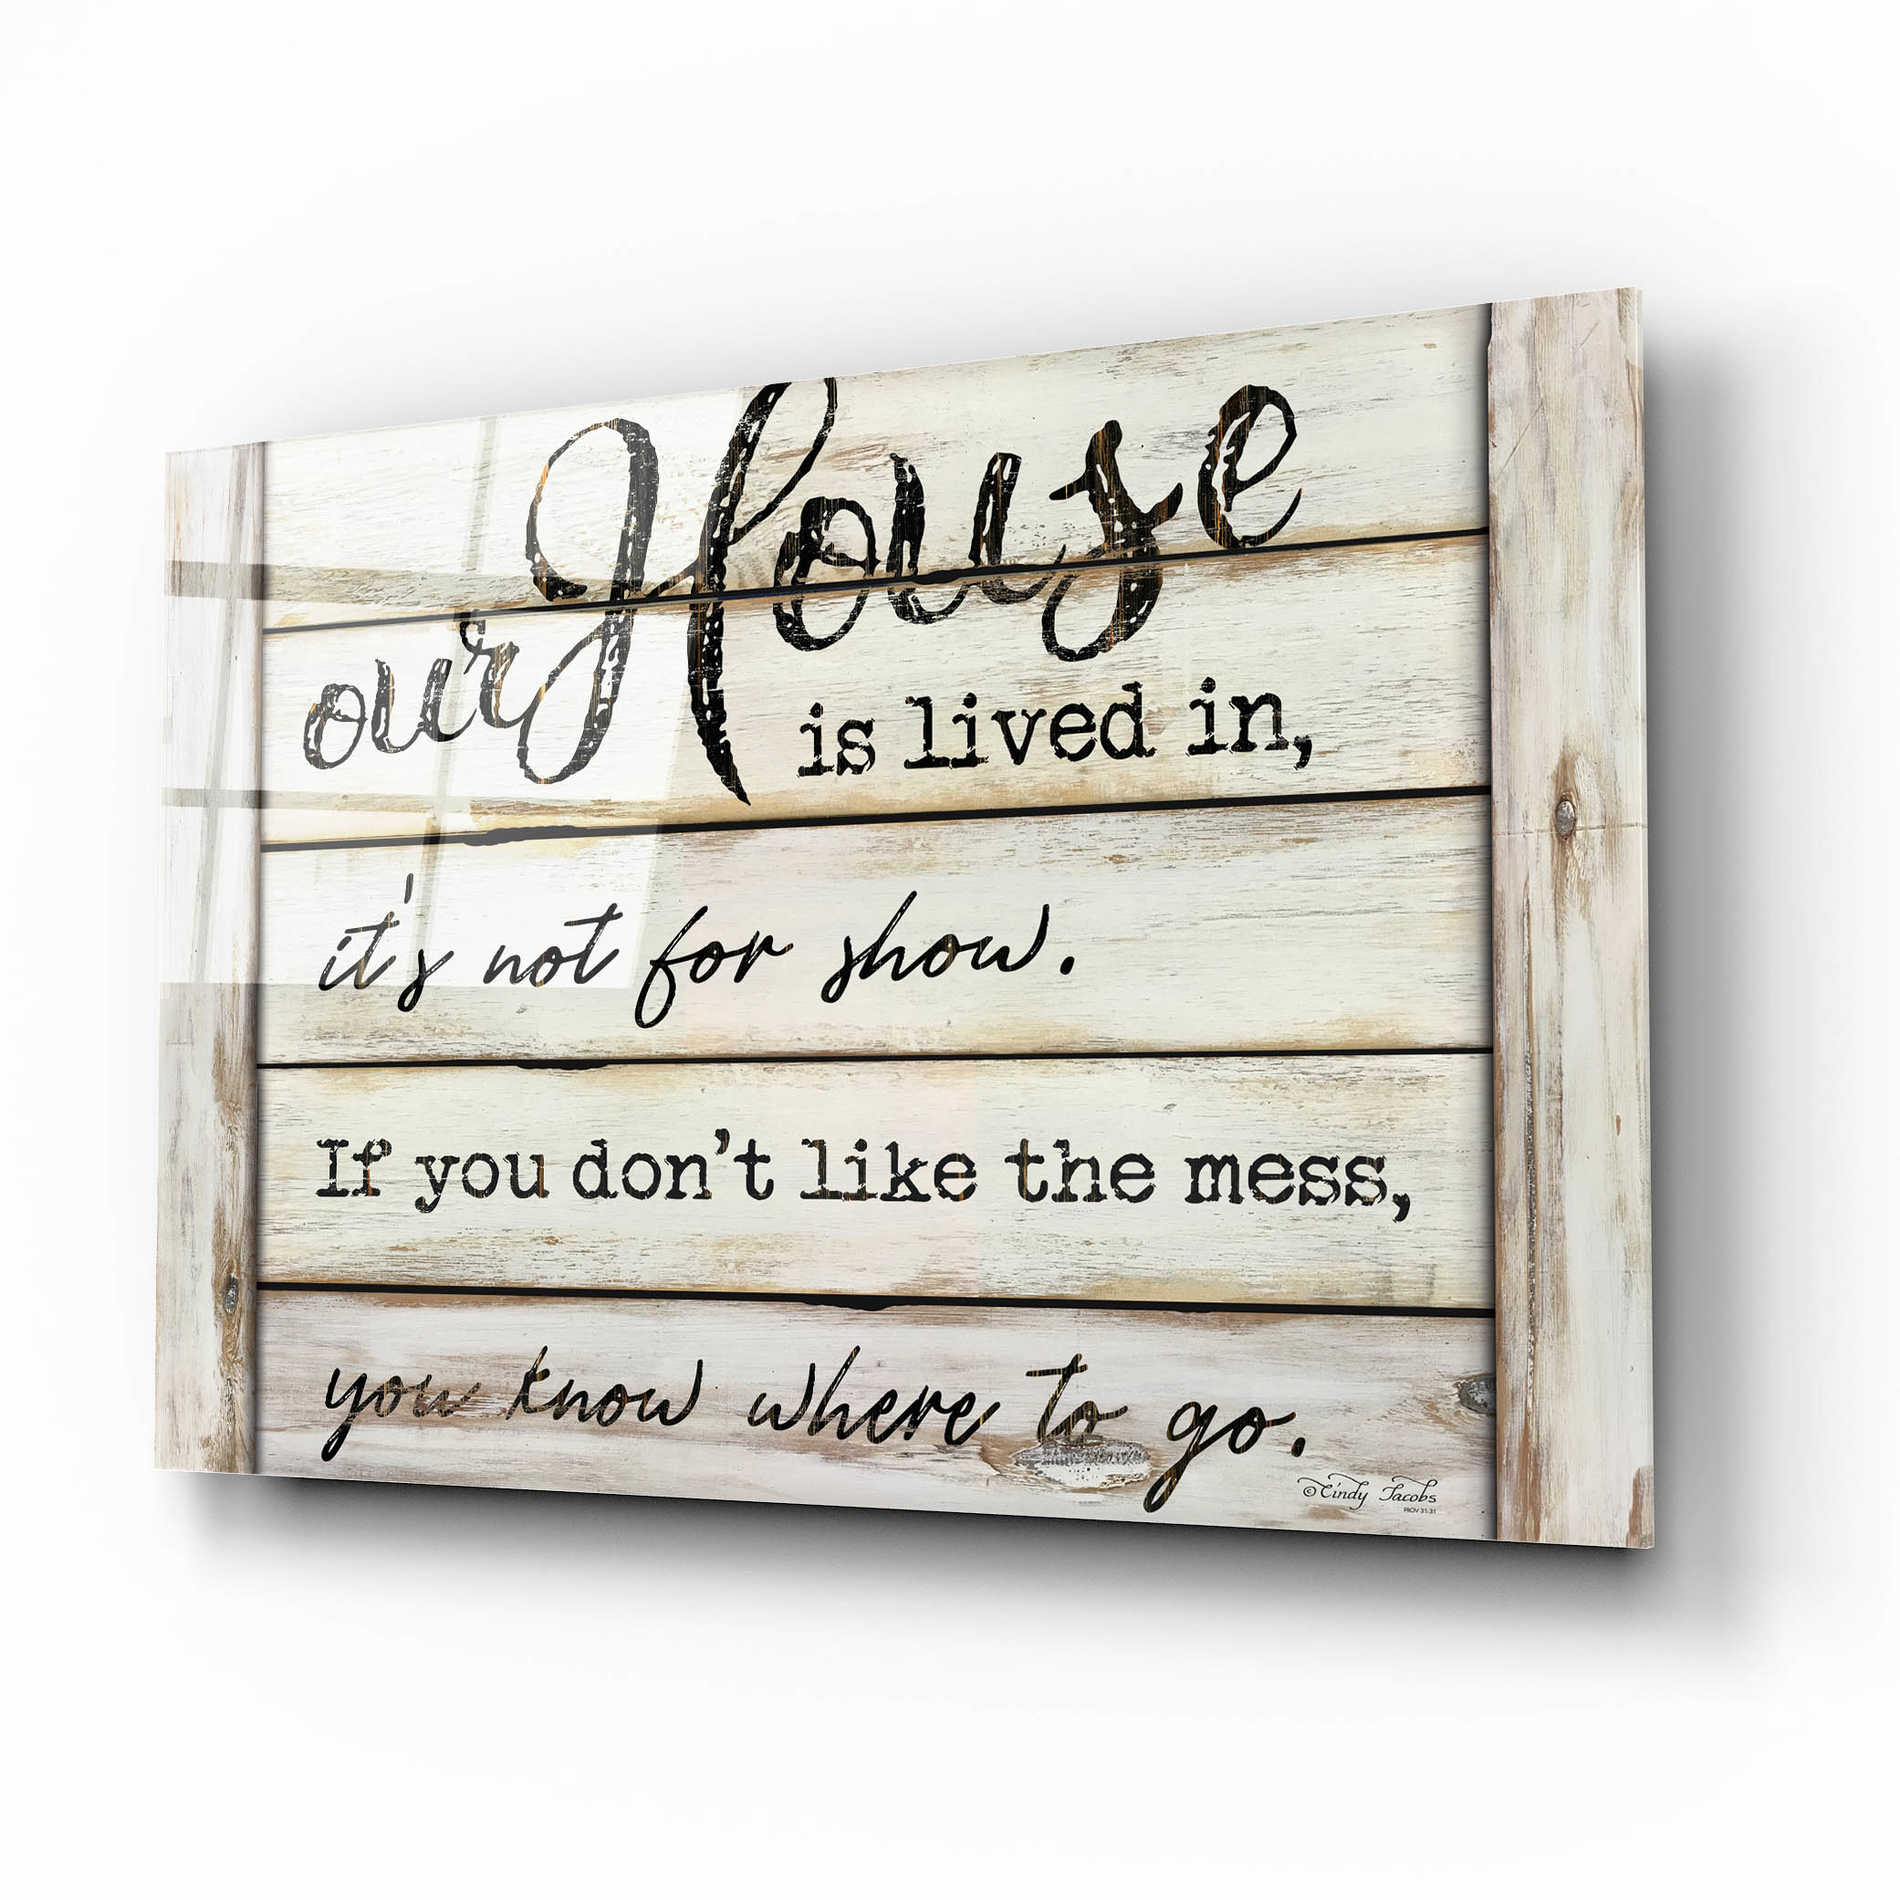 Epic Art 'Our House is Lived In' by Cindy Jacobs, Acrylic Glass Wall Art,16x12